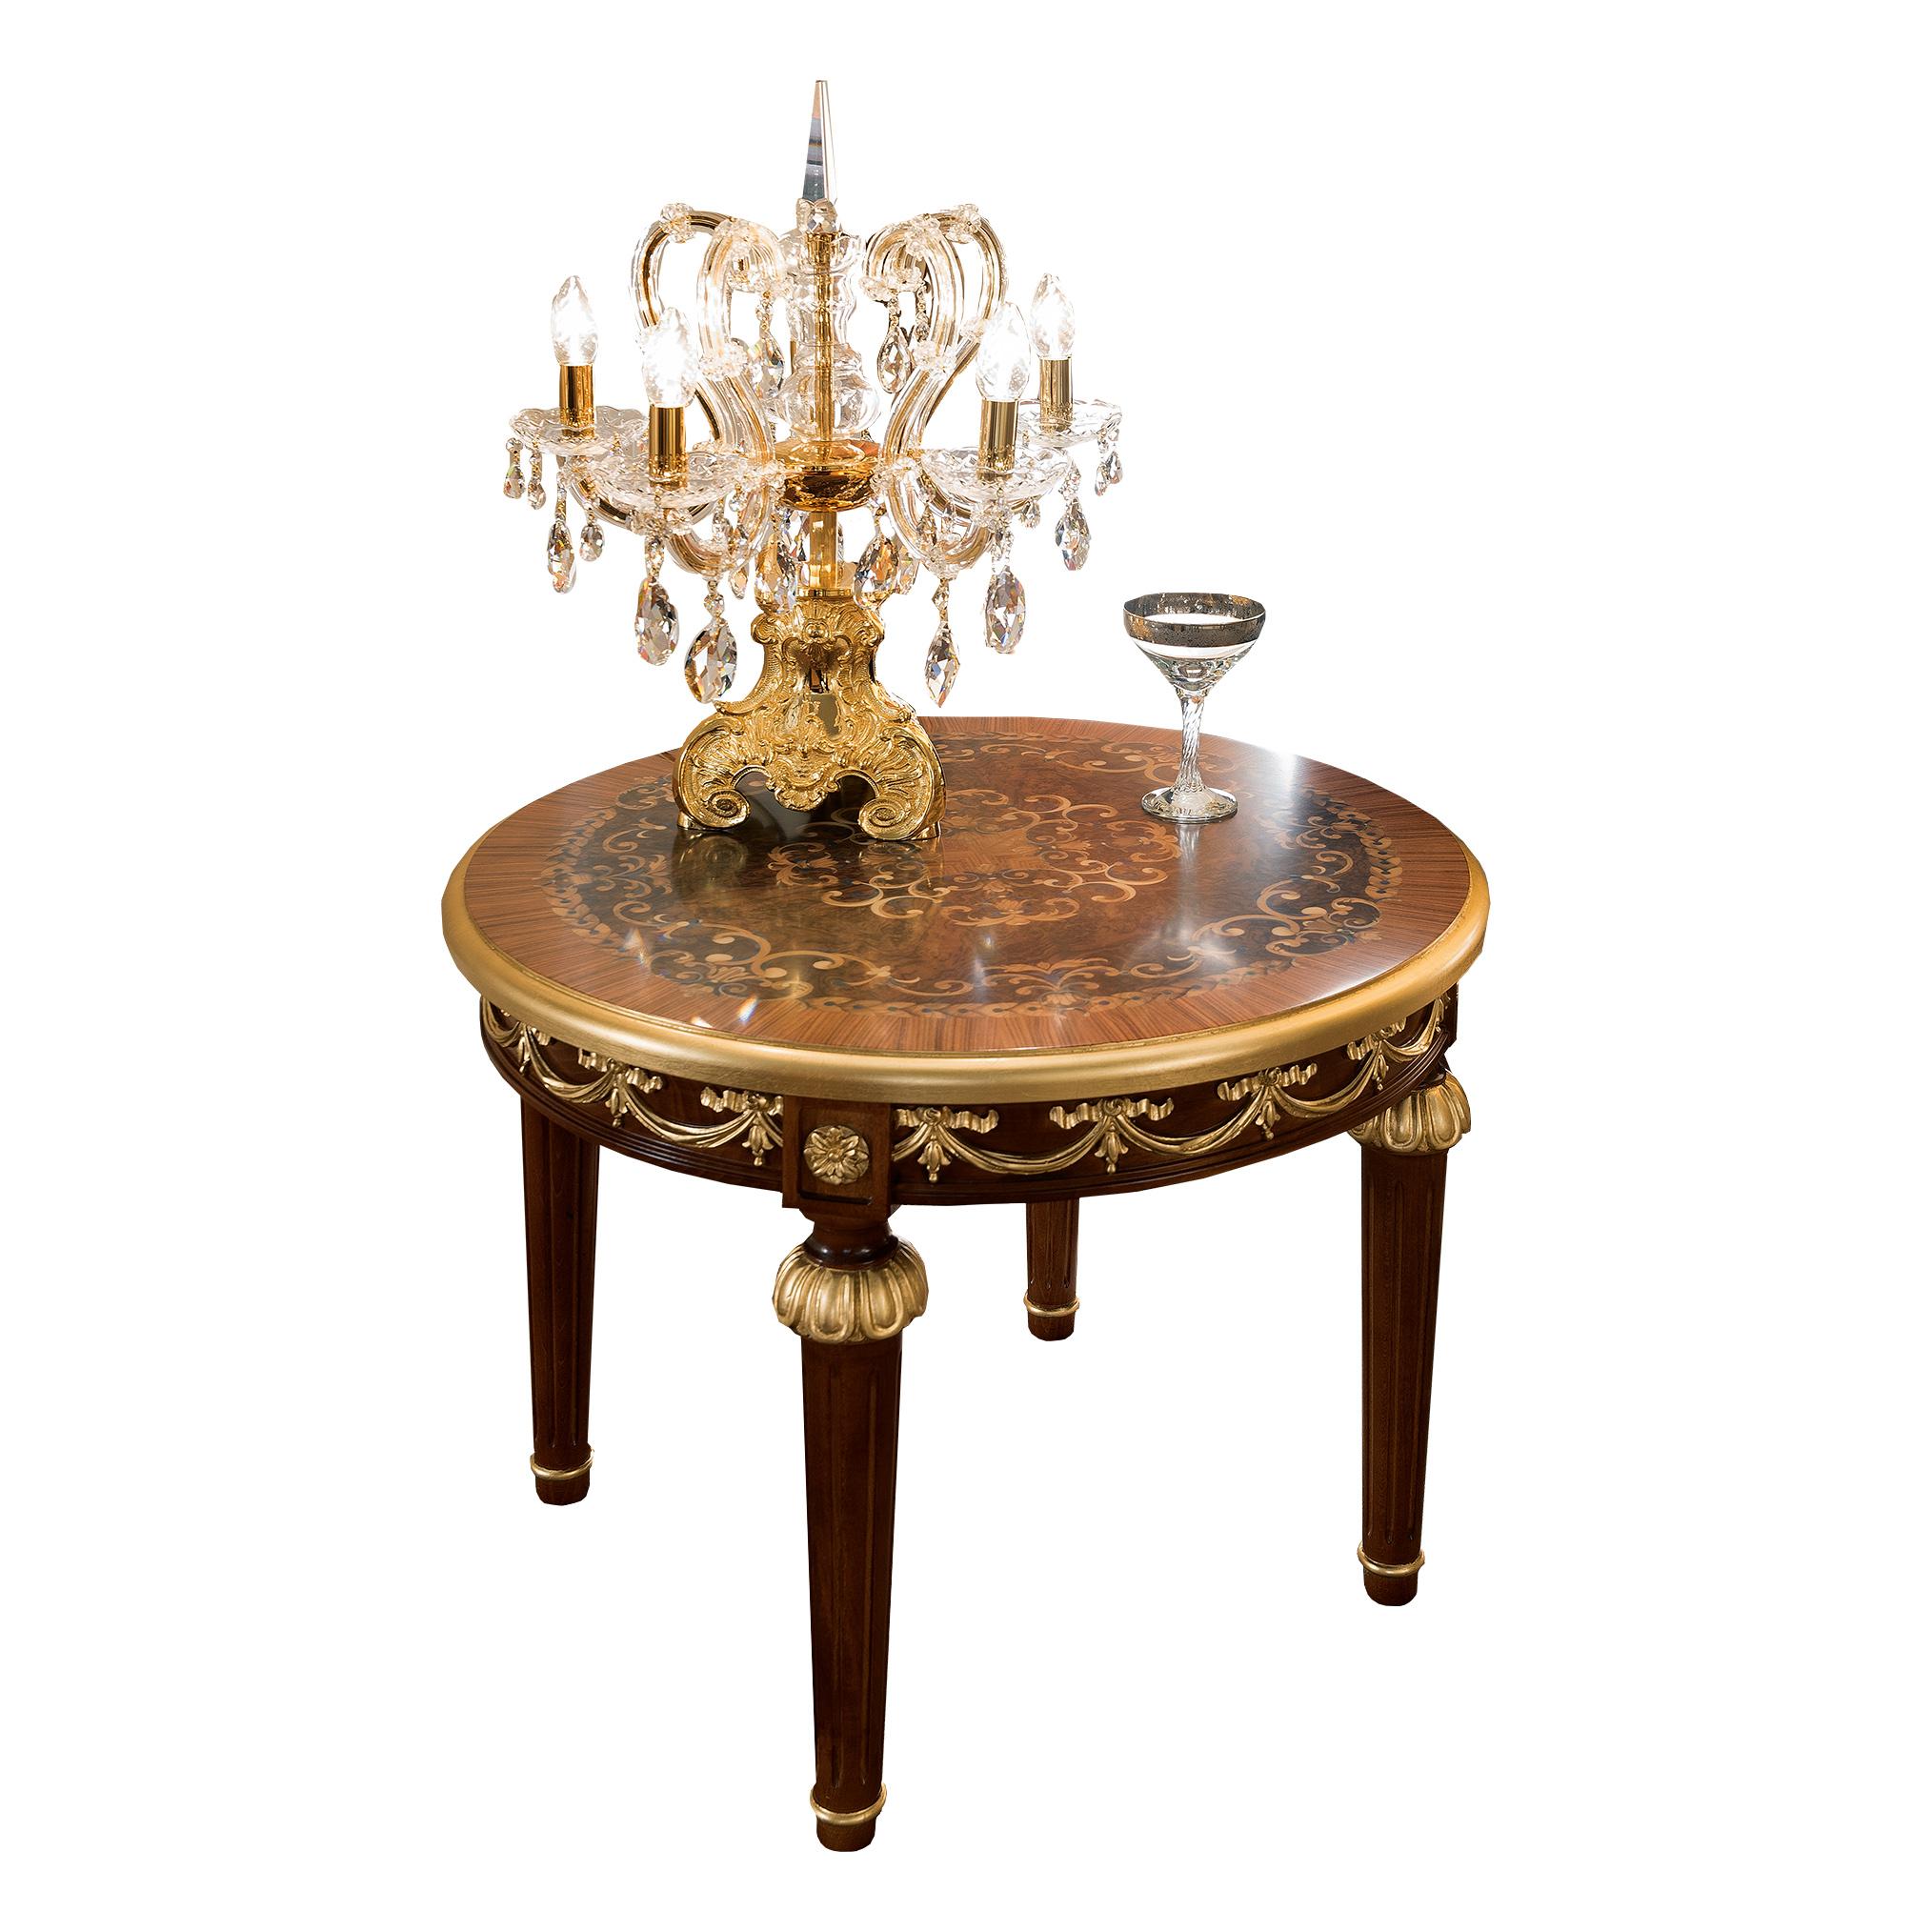 Baroque Revival Round Side Table with Inlaid Top + Gold Leaf Finish, Made in Italy by Modenese For Sale